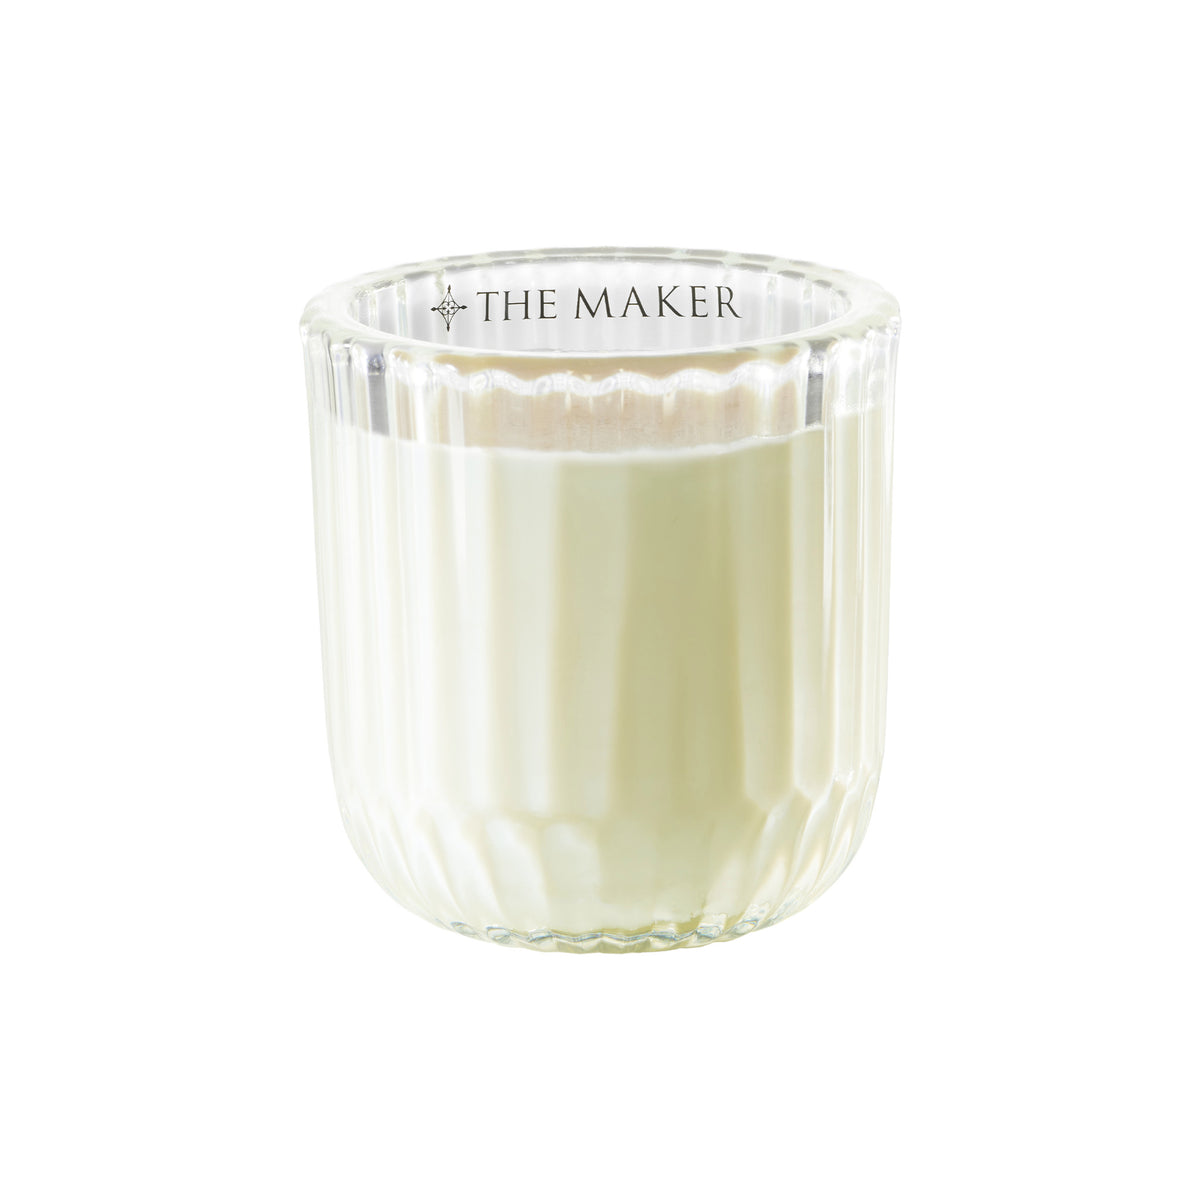 The Maker Artist Candle – bluemercury